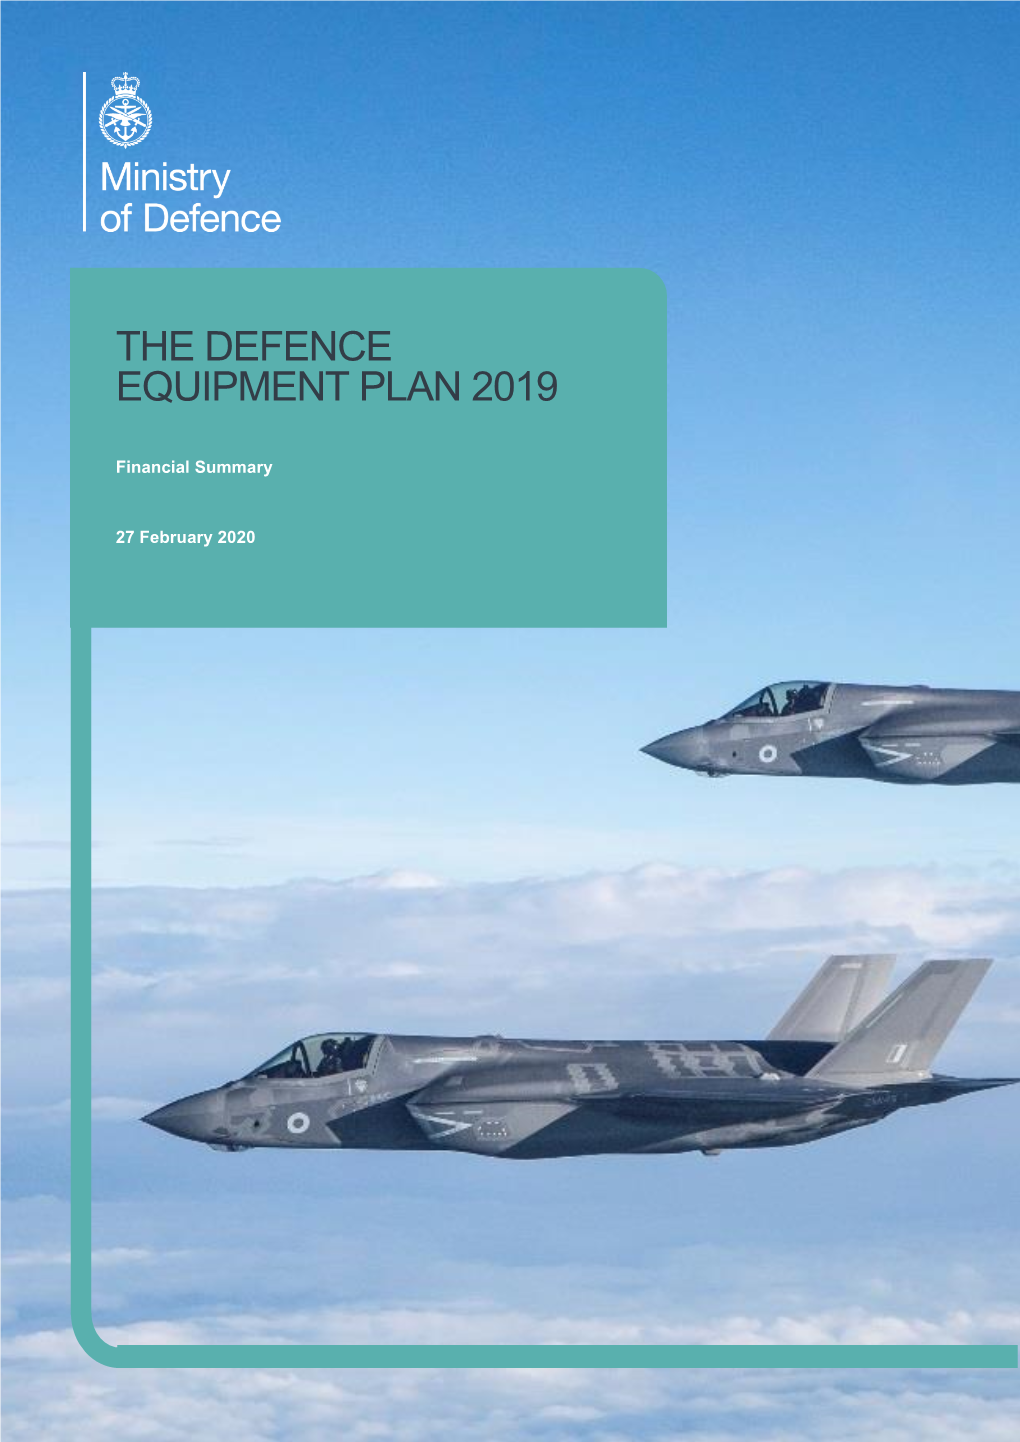 The Defence Equipment Plan 2019